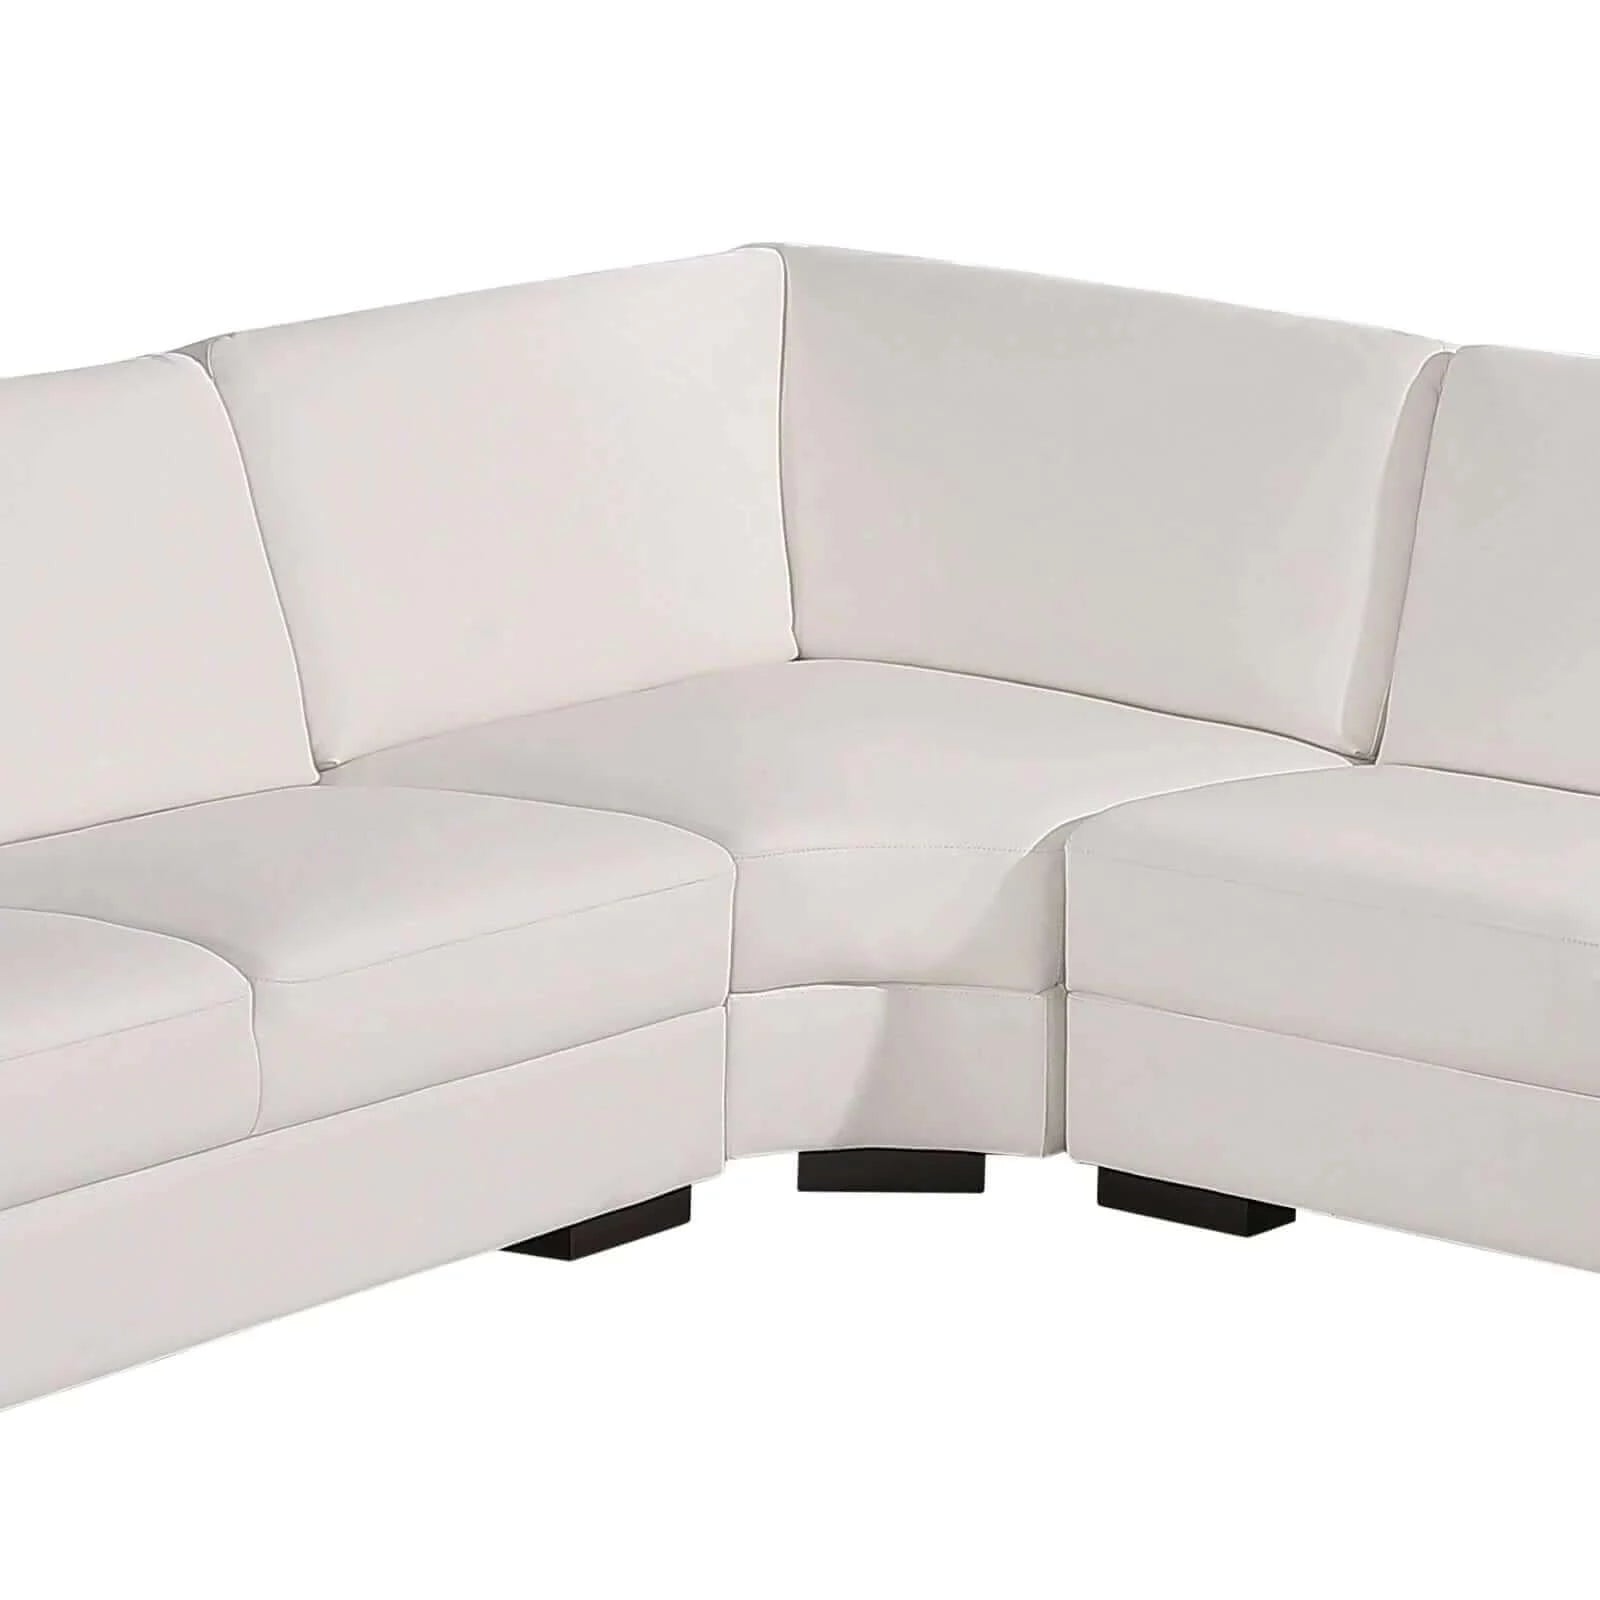 Buy lounge set luxurious 6 seater bonded leather corner sofa living room couch in white with chaise - upinteriors-Upinteriors